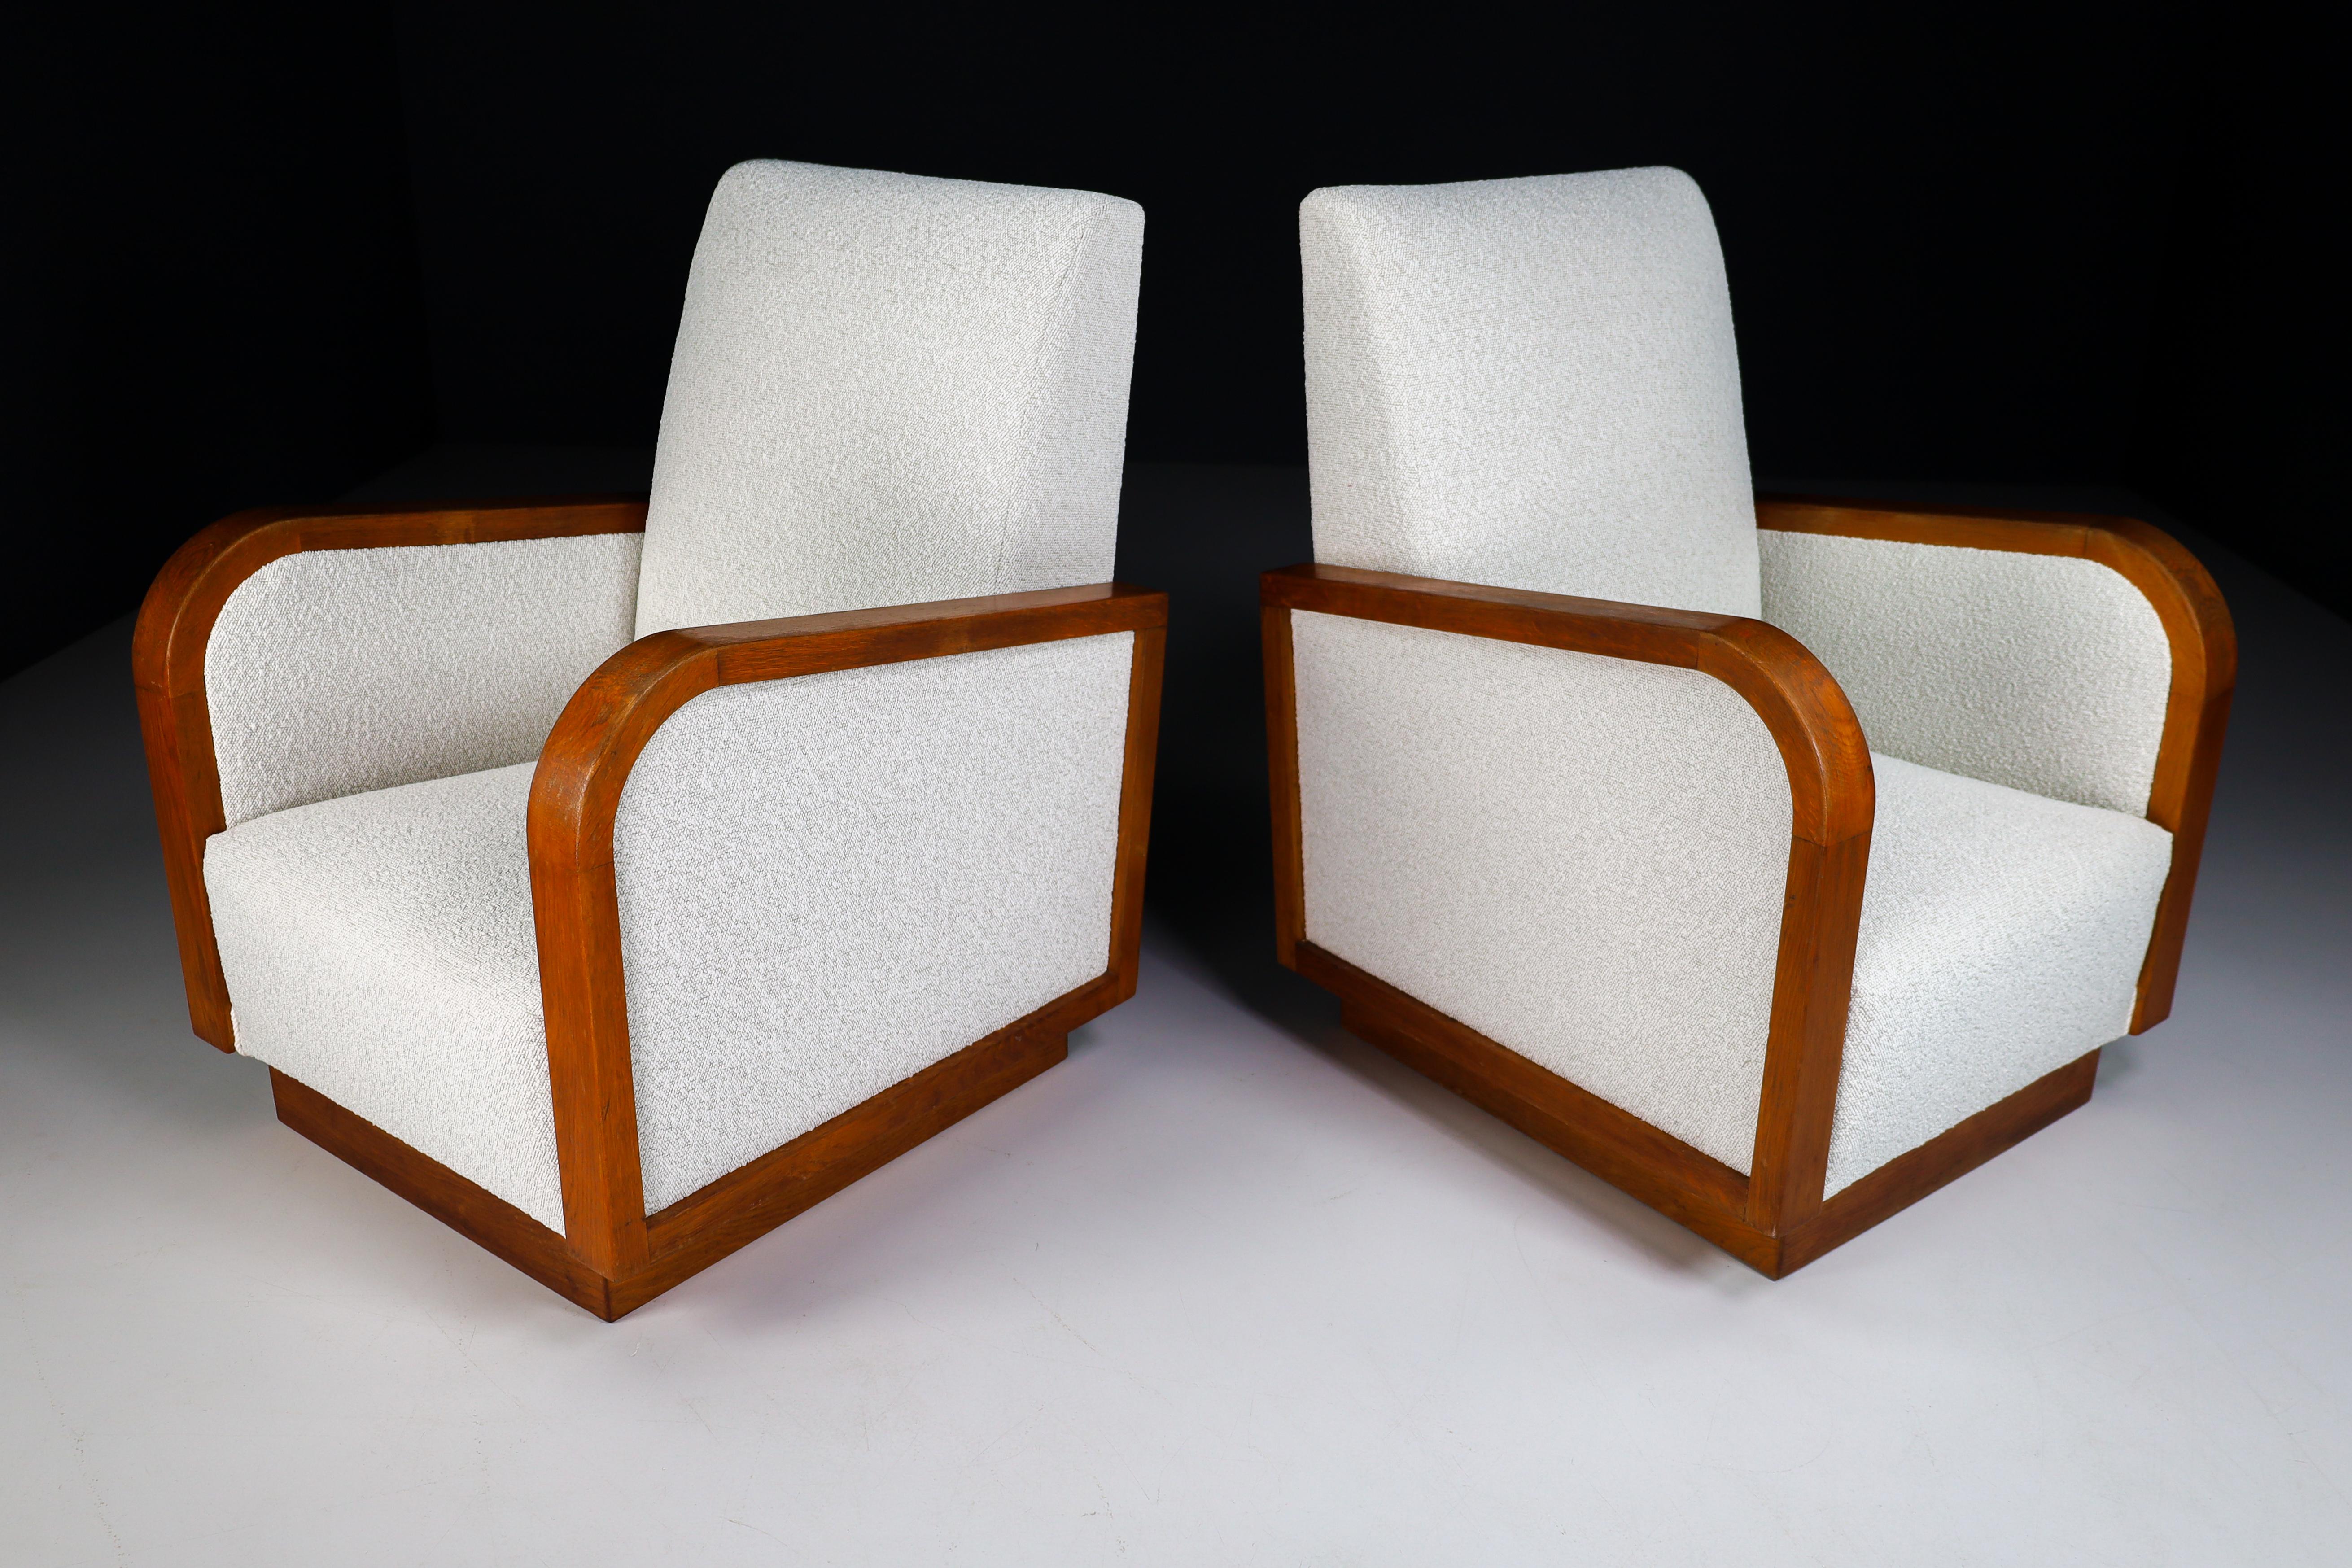 Large size Art Deco lounge chairs manufactured and designed in France 1930s. Made of french oak and these lounge chair has just been reupholstered with Bouclé wool fabric. It is in perfect condition , minor patina on wood parts. These amazing lounge